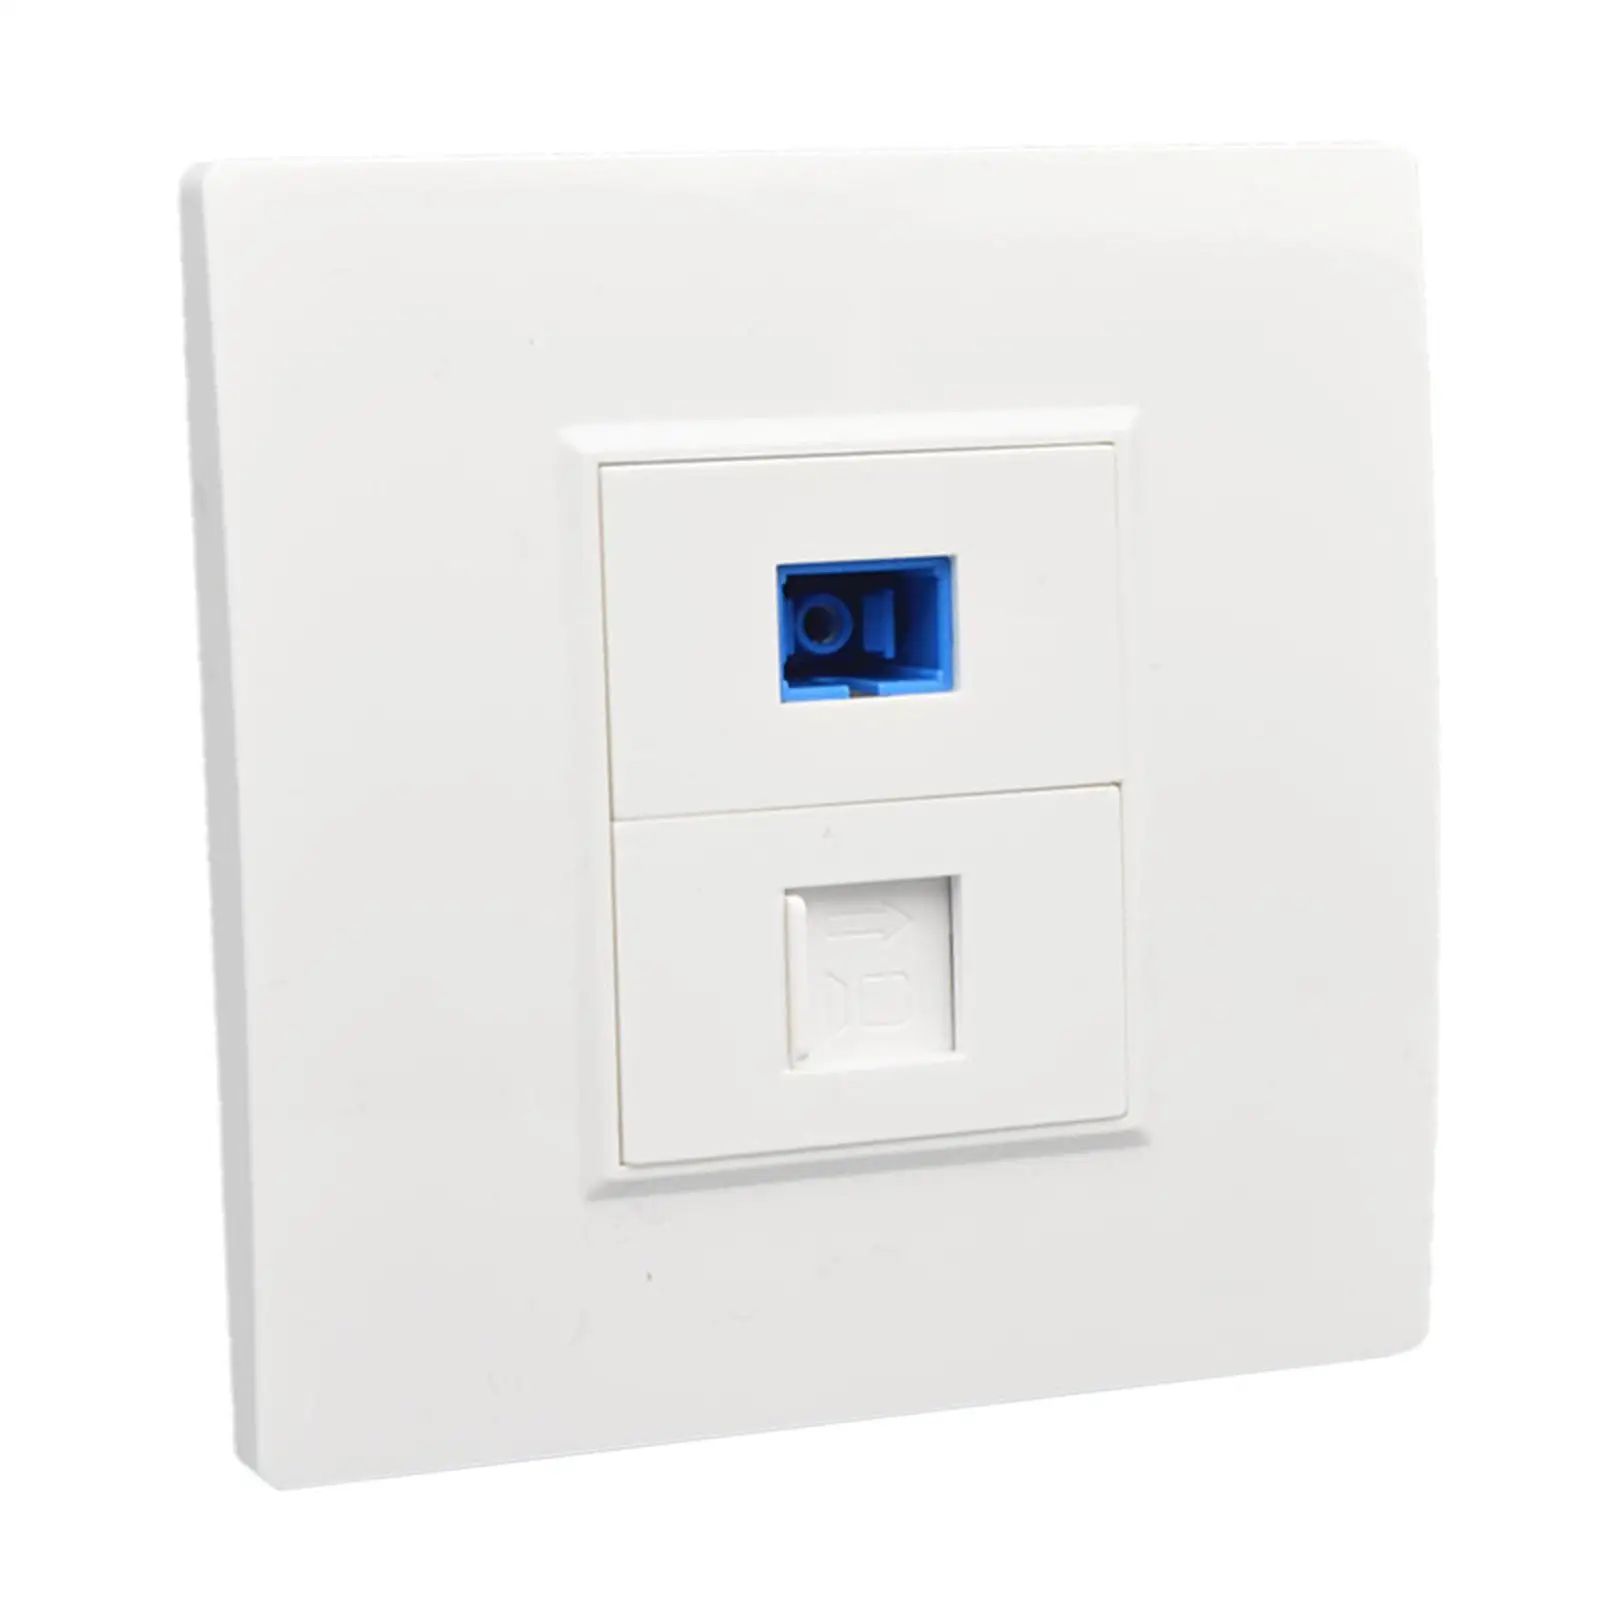 Ethernet Wall Plate Outlet Easy Installation Supplies Professional Optical Interface for Cable Installation Broadband Computer